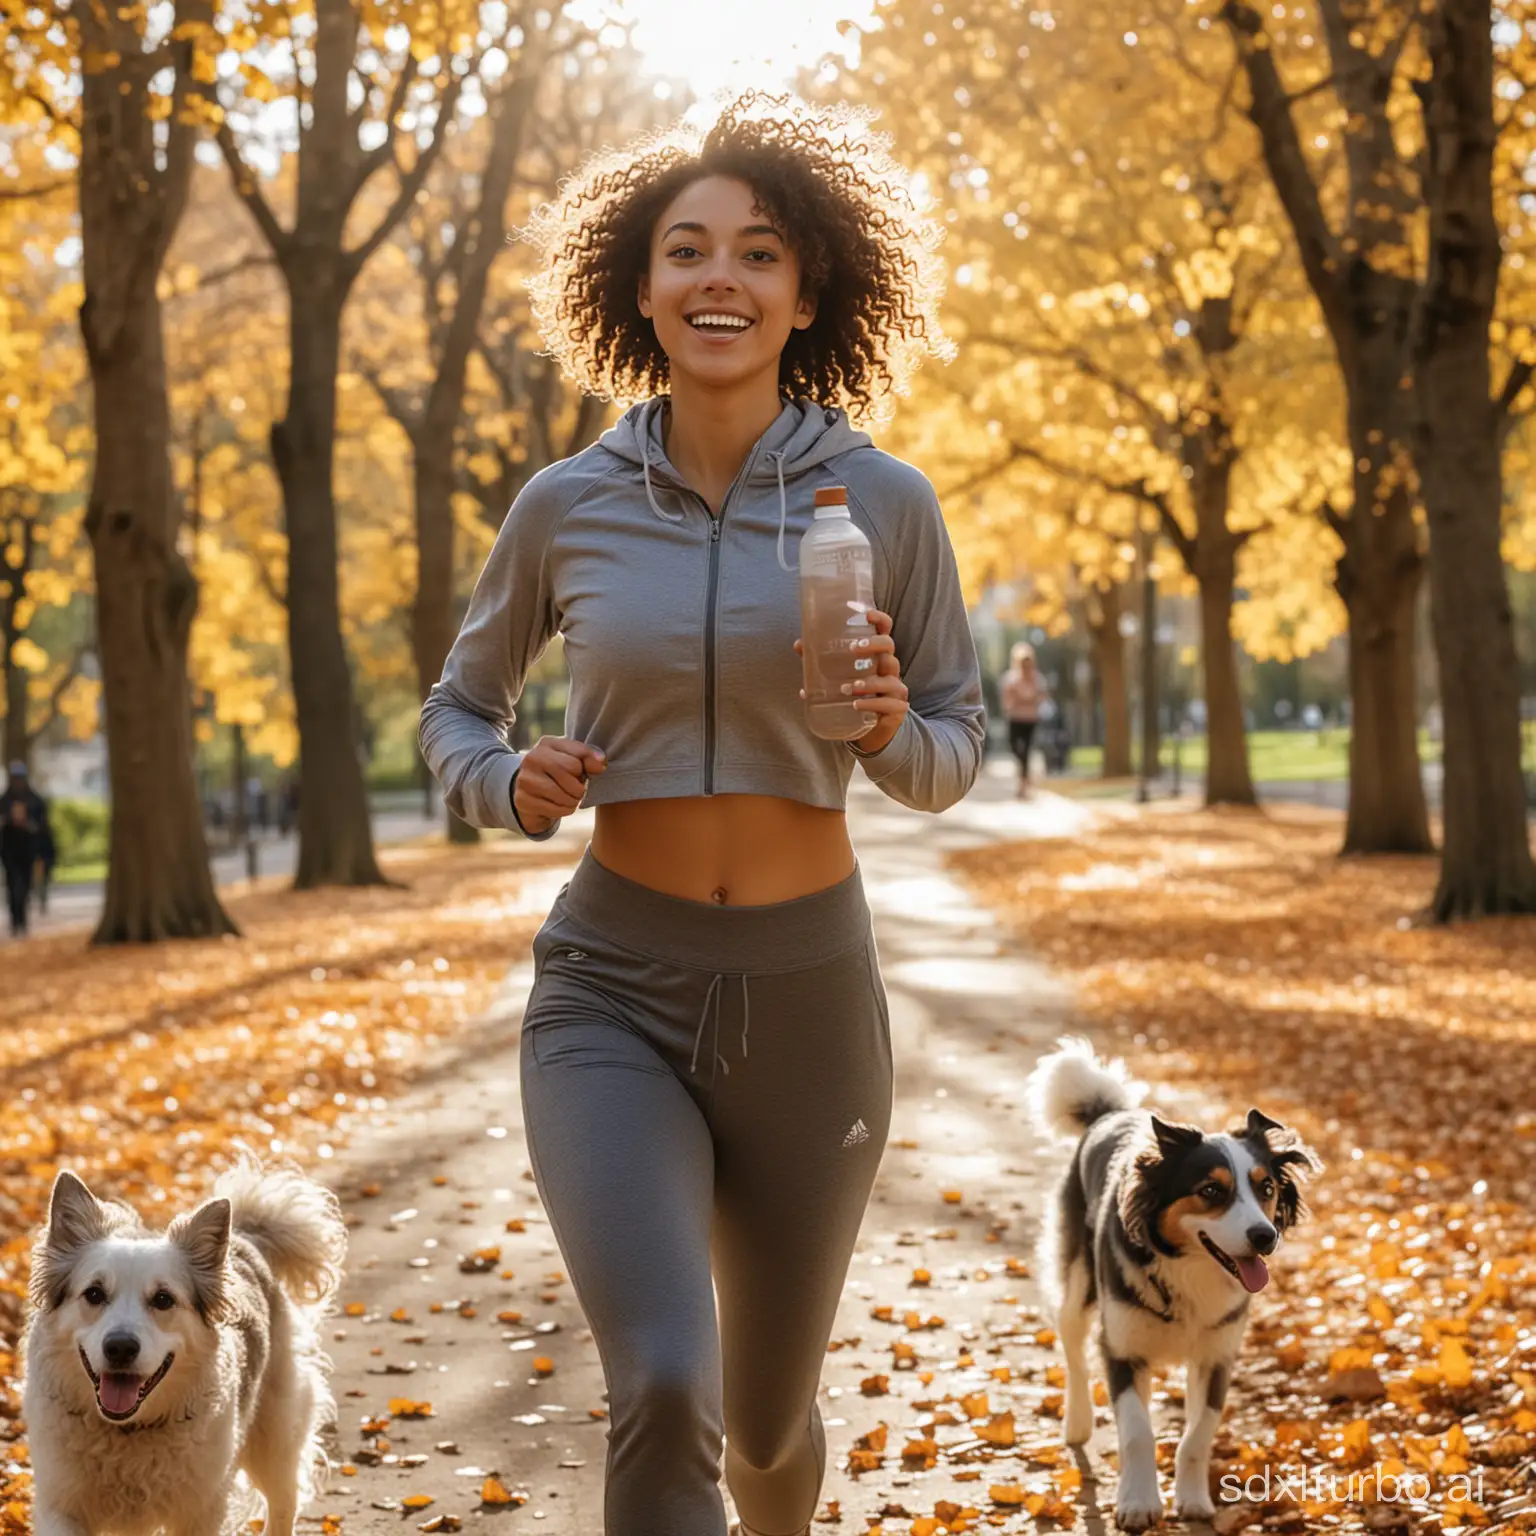 A curly haired girl with an athletic body in sportswear running in a park with a dog, has an encouraging expression with sunlight added to the scene holding a water bottle in her hand, with fallen leaves on the ground and other joggers in the background